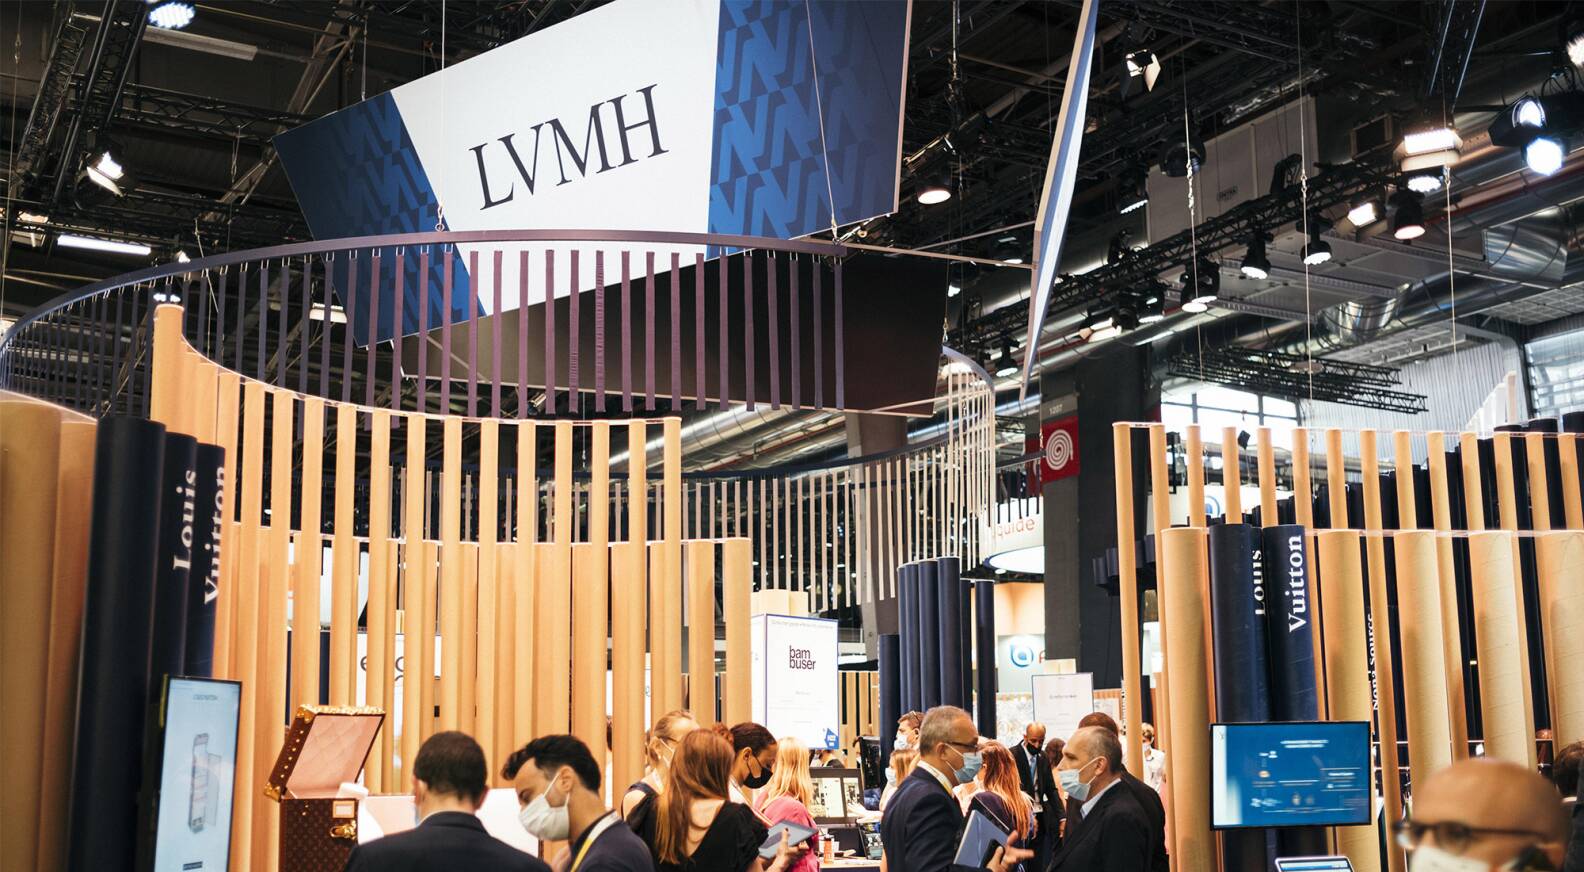 LVMH held the digital Demo Day for its business incubator's, La